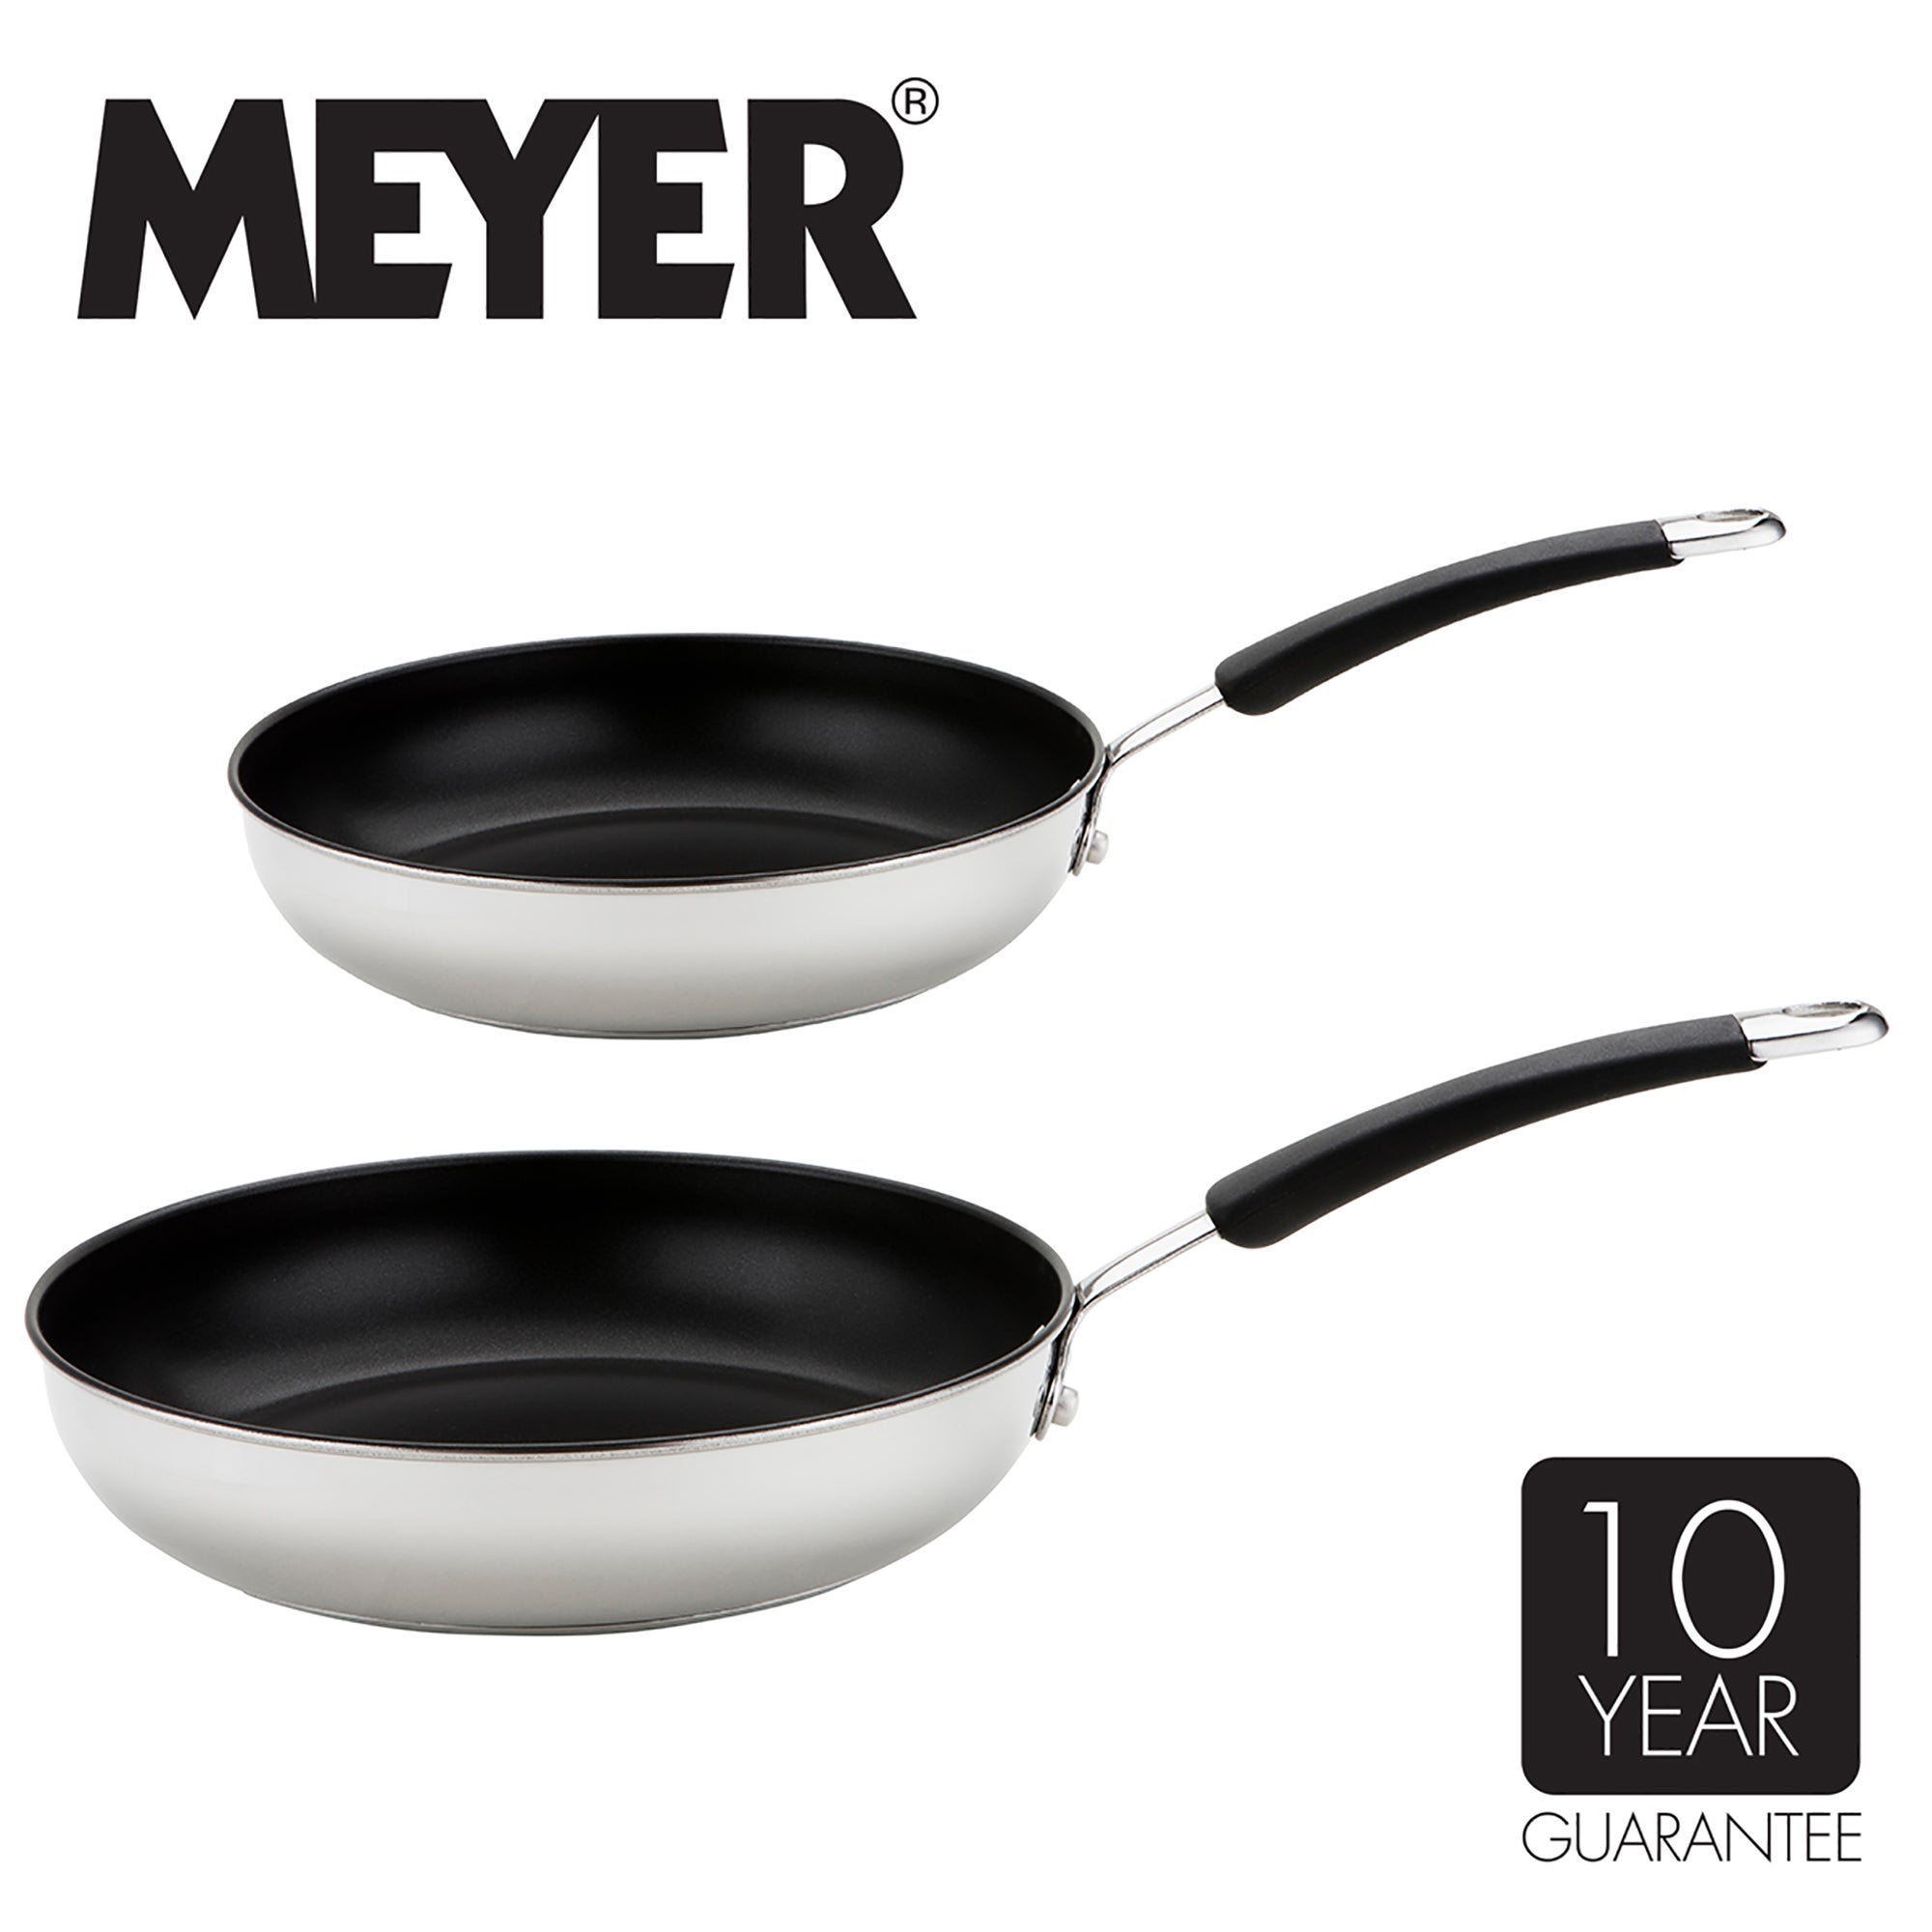 Image of Meyer Induction Stainless Steel 2 Piece Frying Pan Set Black/Silver